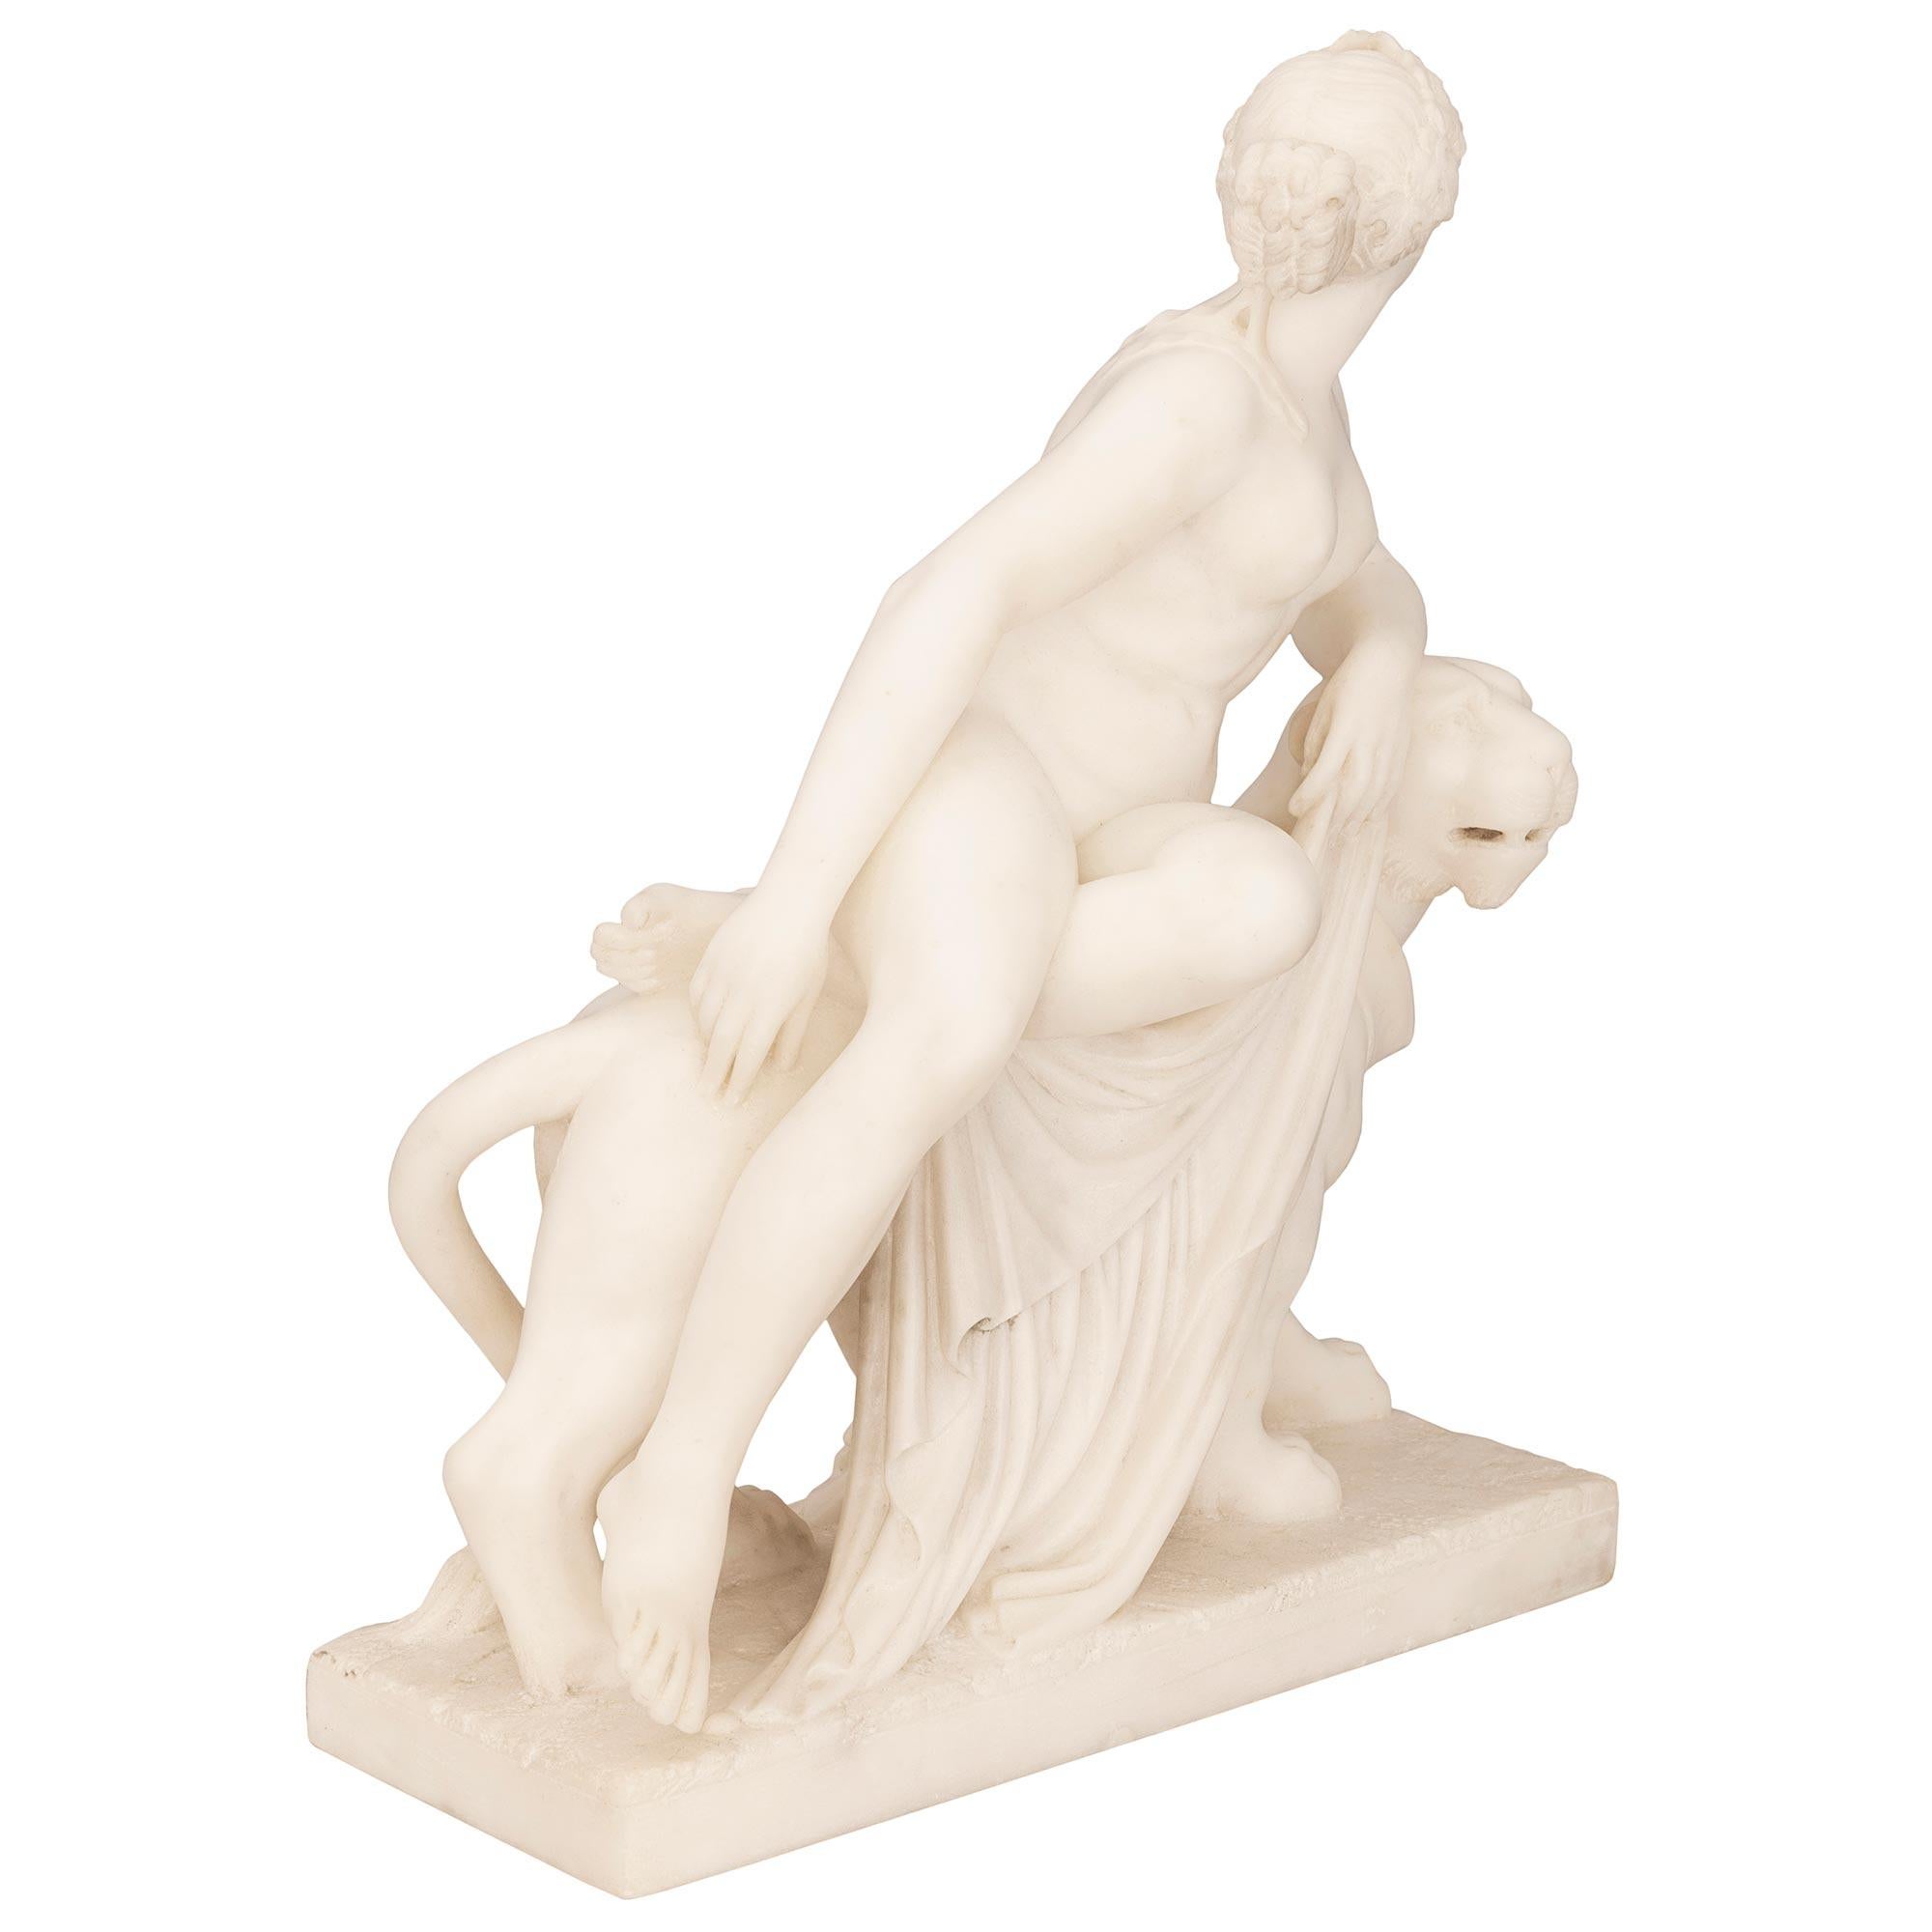 A striking and very high quality Italian 19th century alabaster statue of the Greek goddess Ariadne seated on her panther signed P. Bazzanti Florence. The statue is raised by a rectangular base with a fine wrap around mottled border and wonderfully